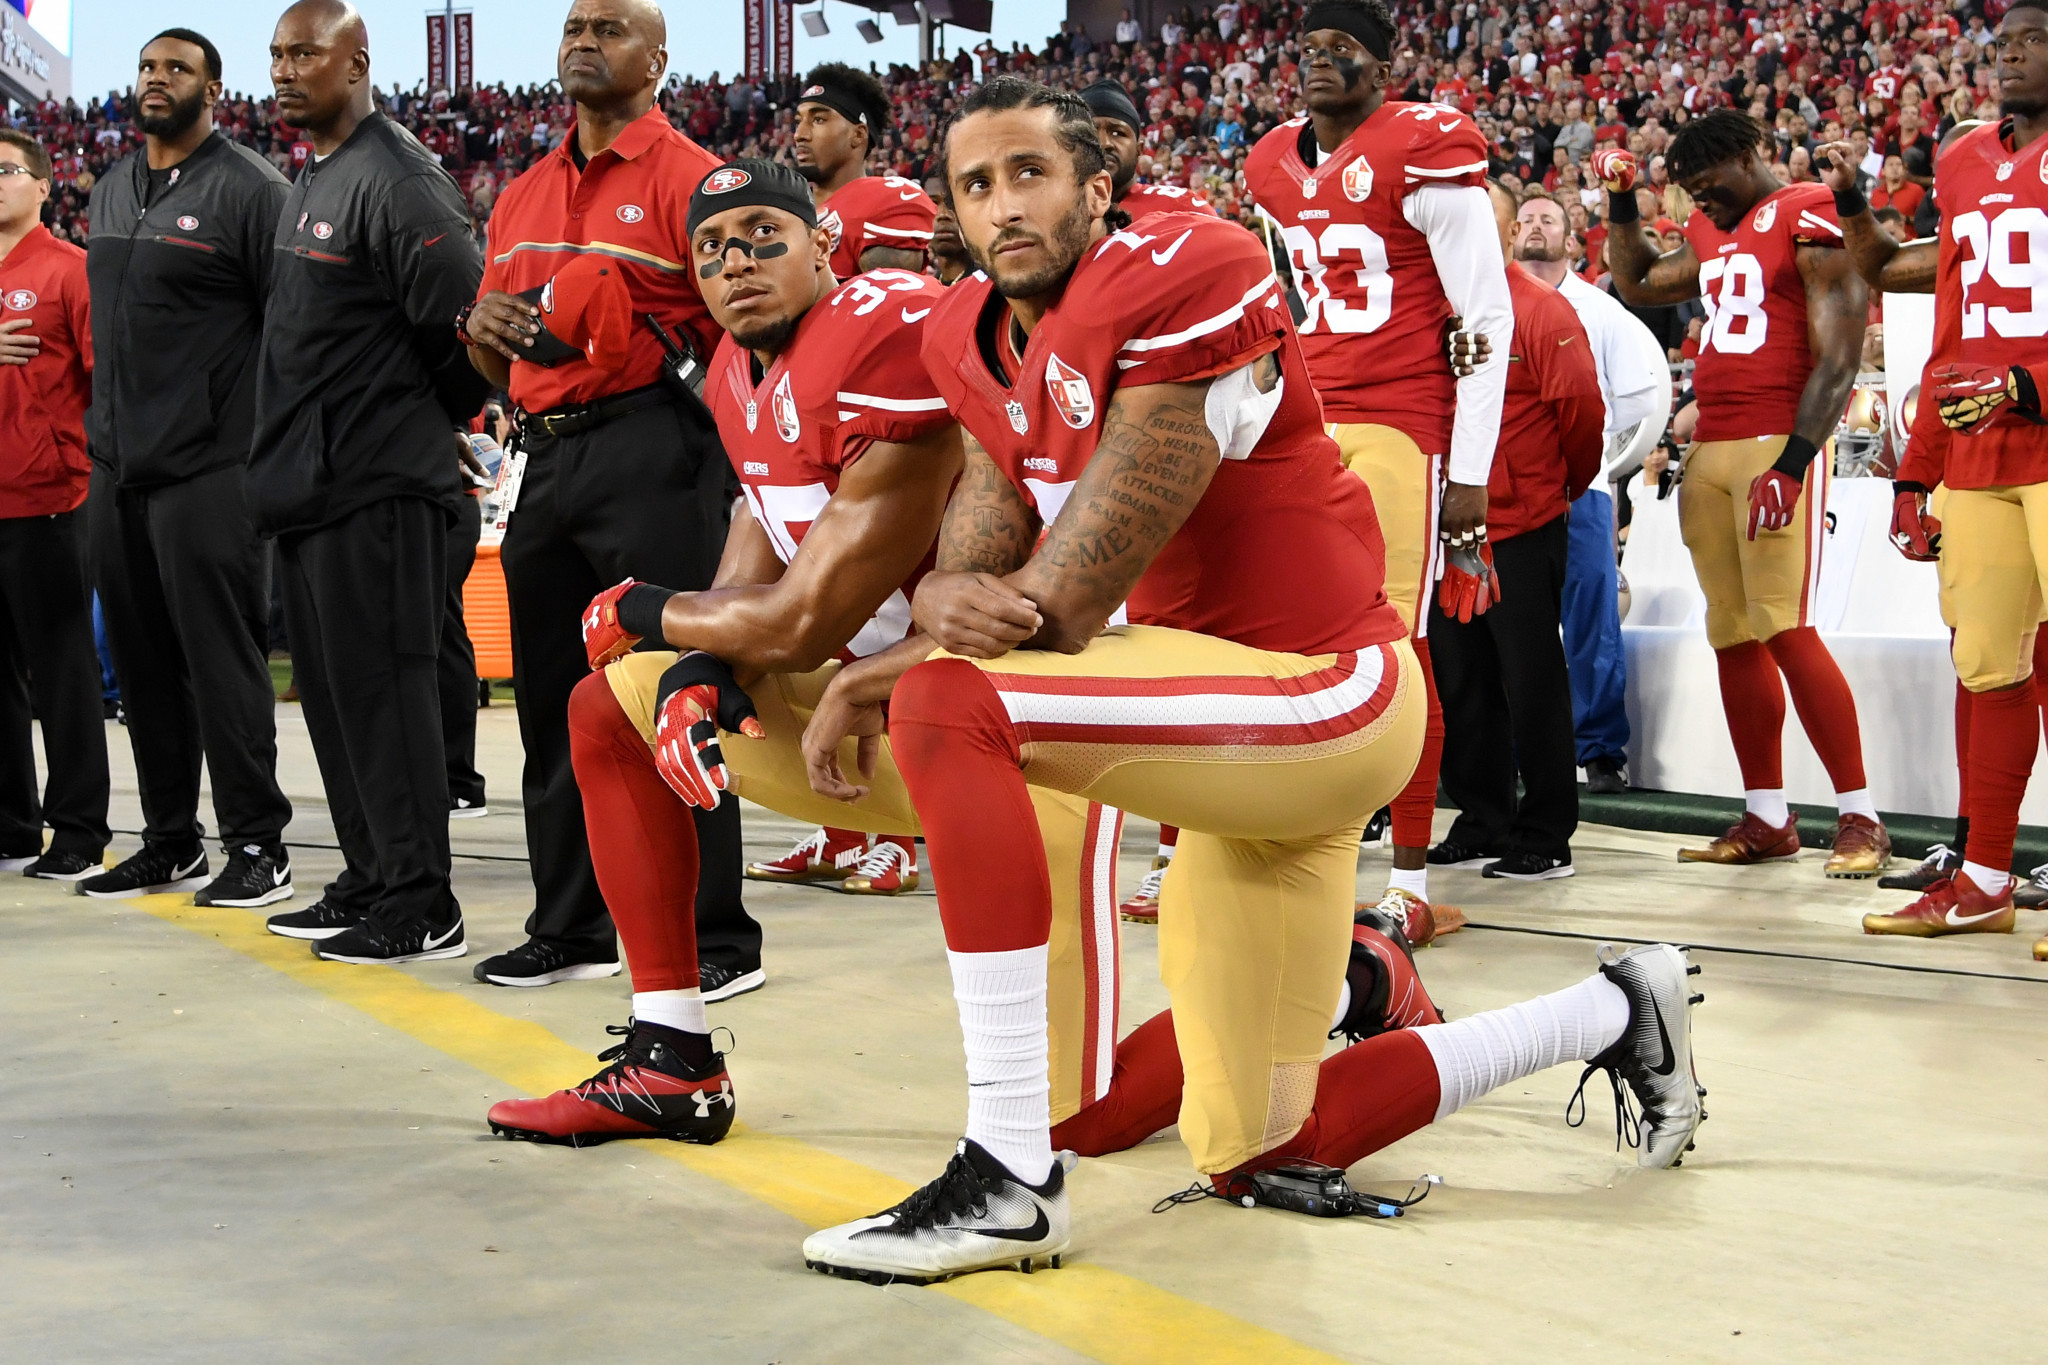 Colin Kaepernick and team-mate Eric Reid of the San Francisco 49ers kneel in protest during the national anthem prior to playing the Los Angeles Rams in September 2016. Kaepernick has been named GQ magazine's Citizen of the Year ©Getty Images